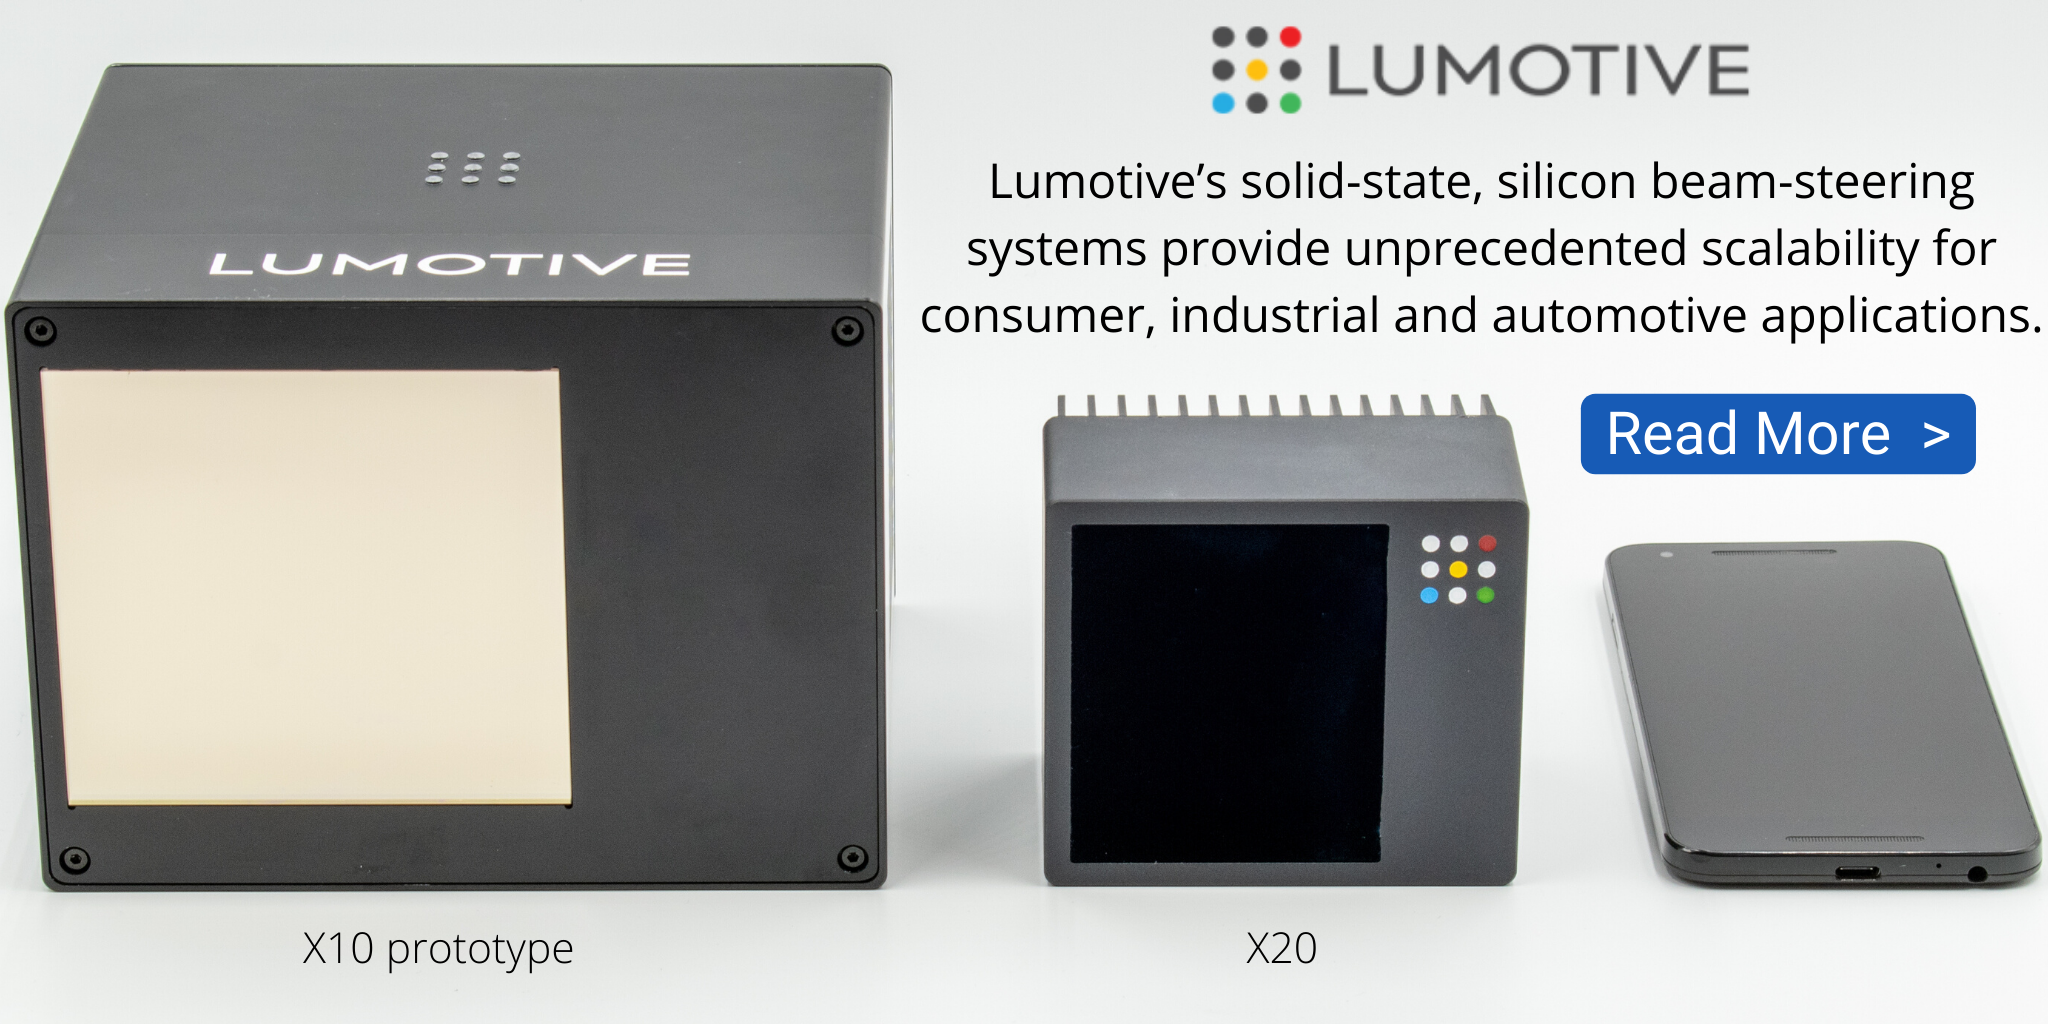 Lumotive, Tuesday, May 19, 2020, Press release picture